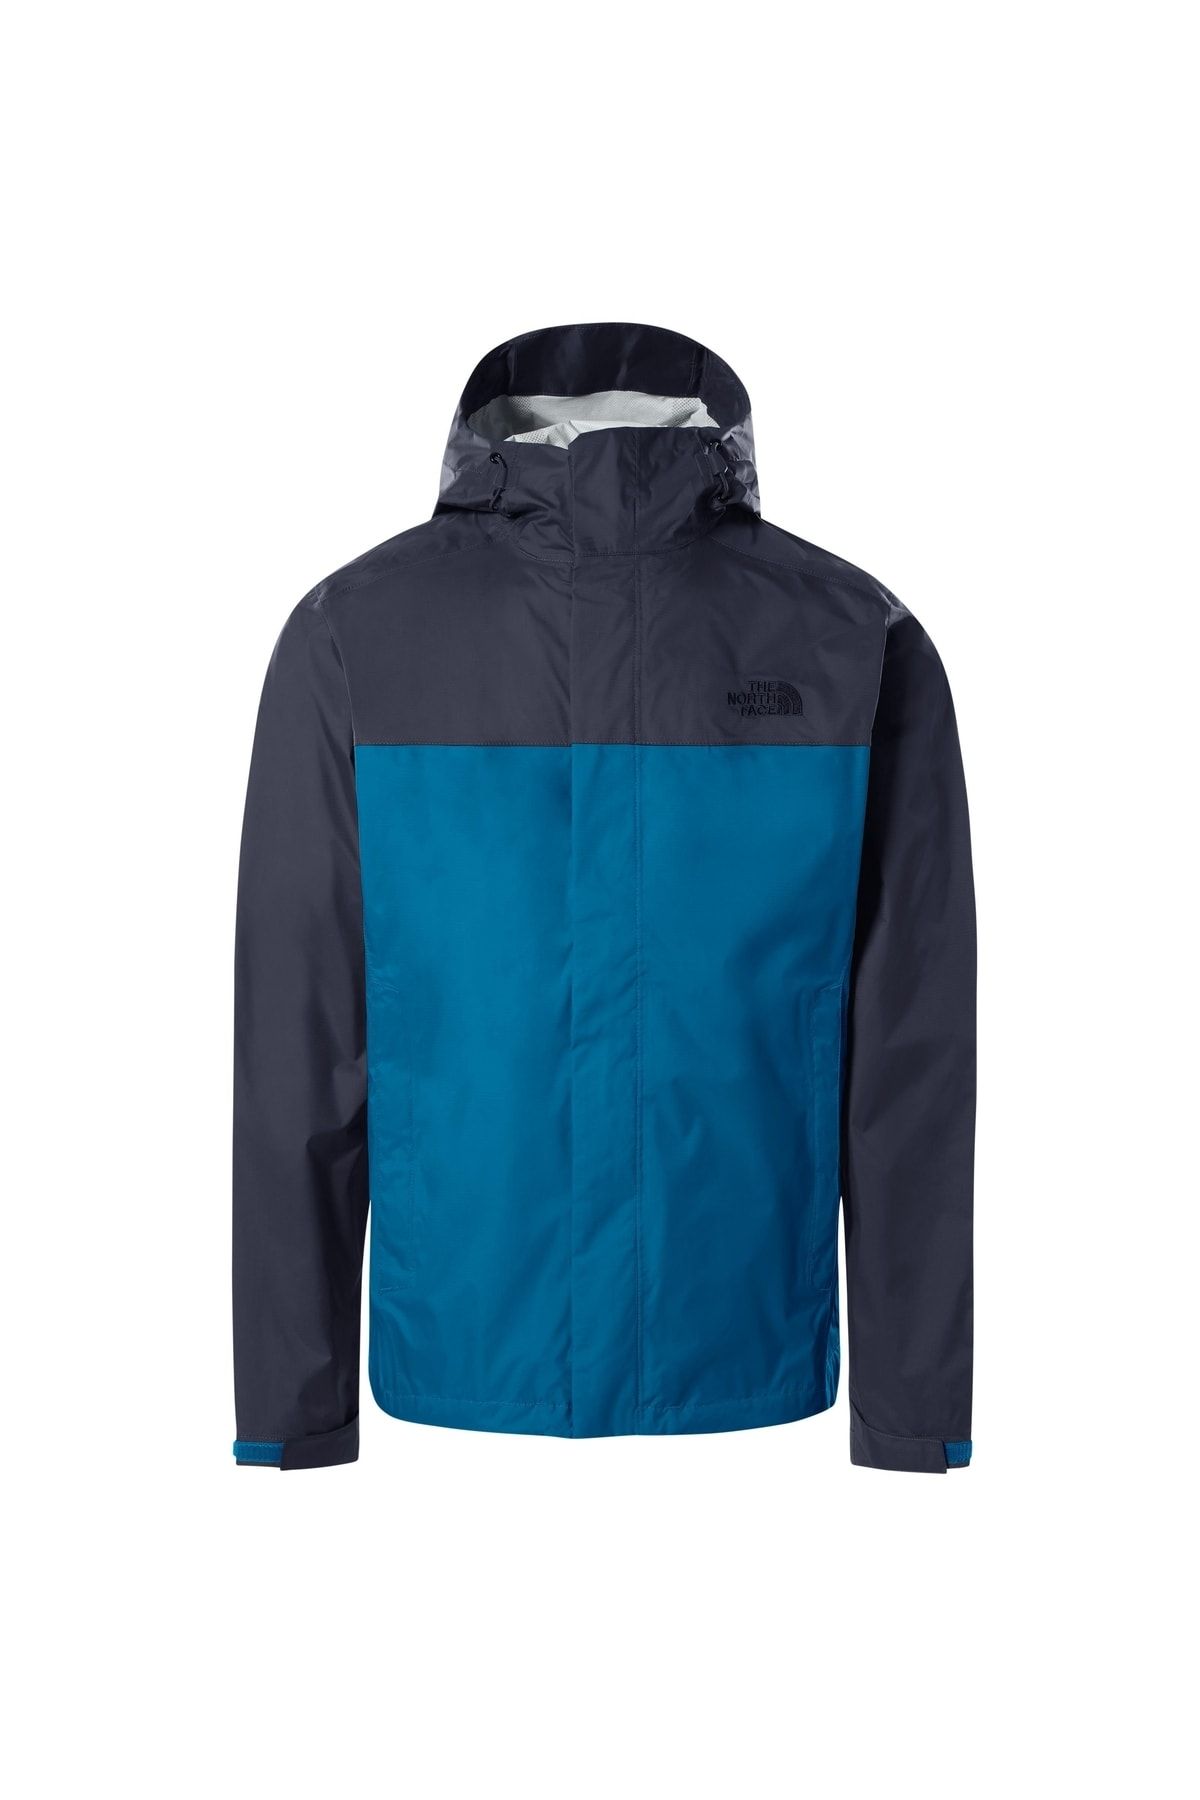 The North Face M Venture 2 Jacket Nf0a2vd348ı1